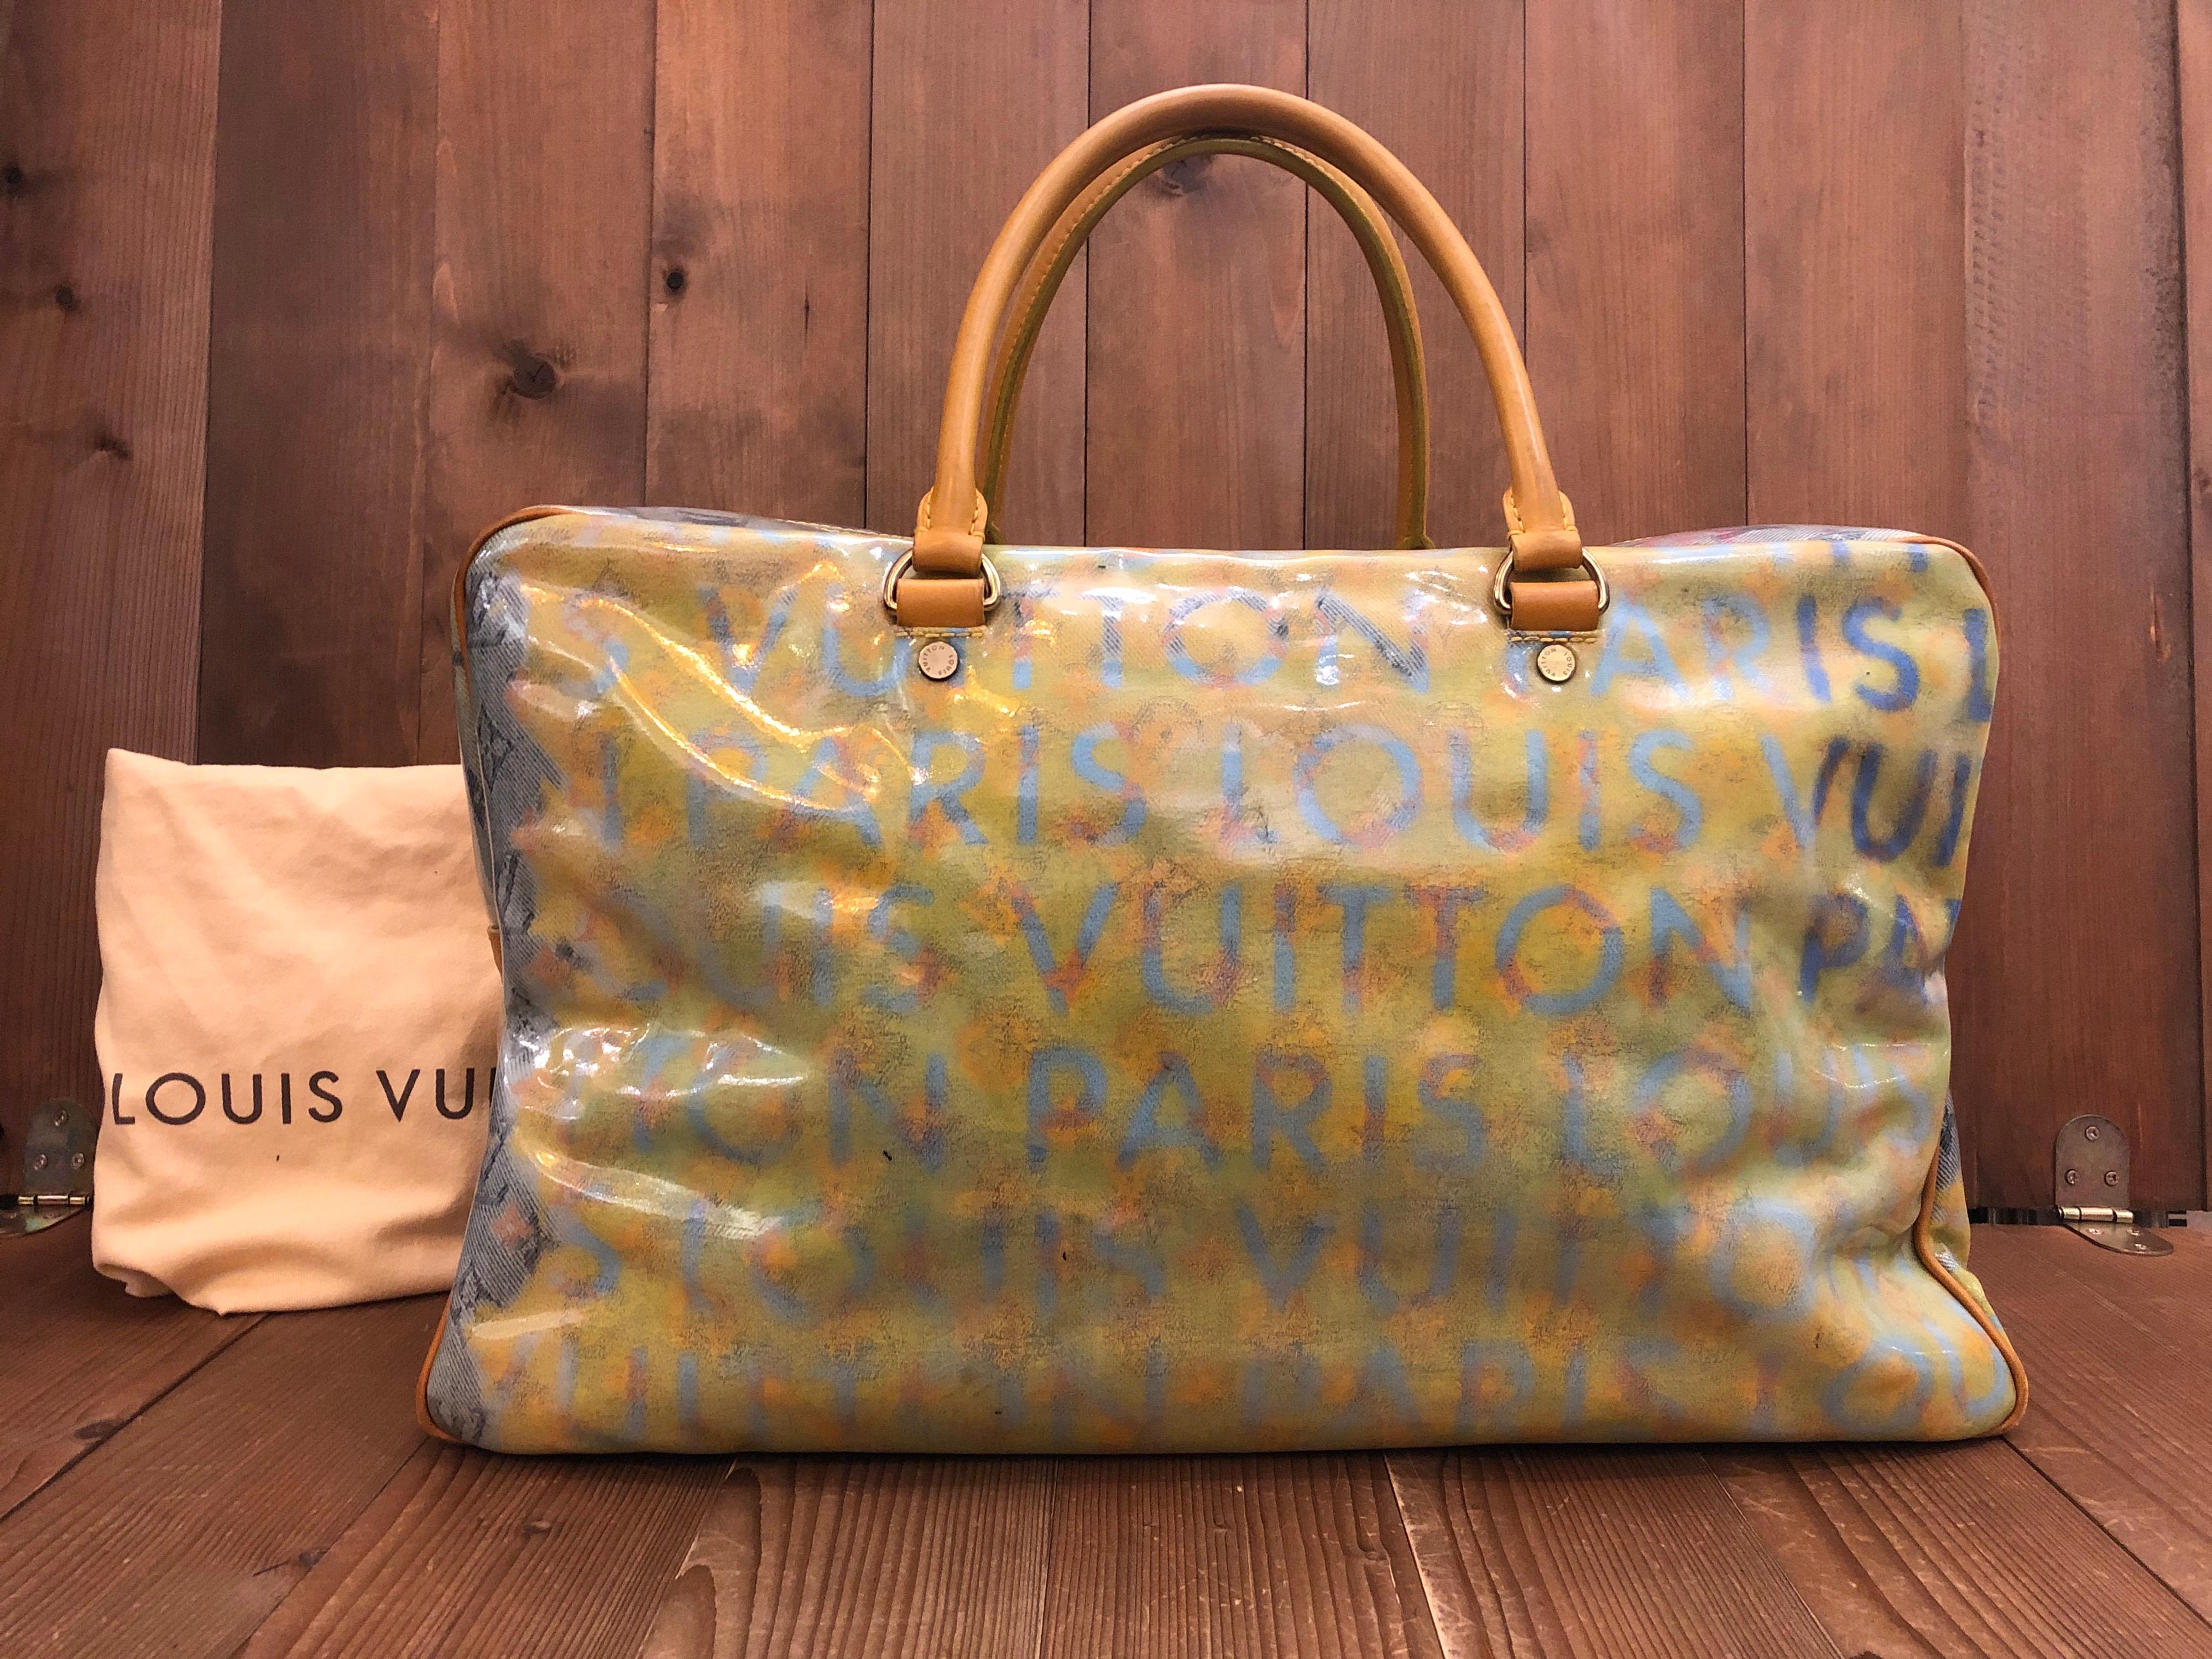 The Louis Vuitton Boston bag is crafted of stonewashed monogram denim canvas and splashed with beautiful watercolor LV monogram artwork designed by renown artist Richard Prince and coated with transparent vinyl making it repellent to water. This